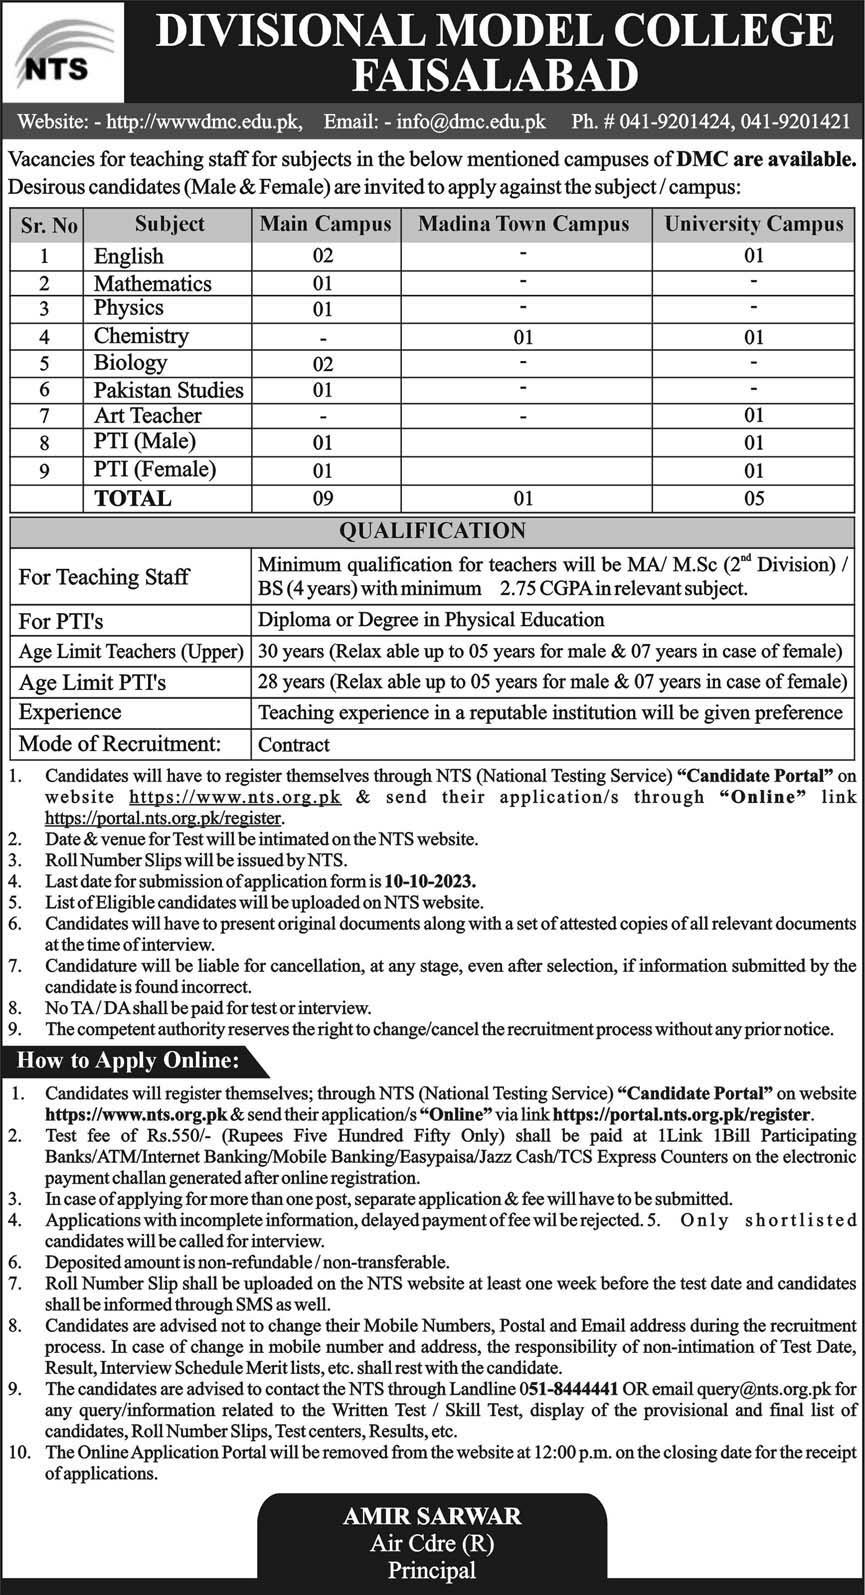 Divisional Model College Faisalabad Teaching Jobs Opportunities 2023